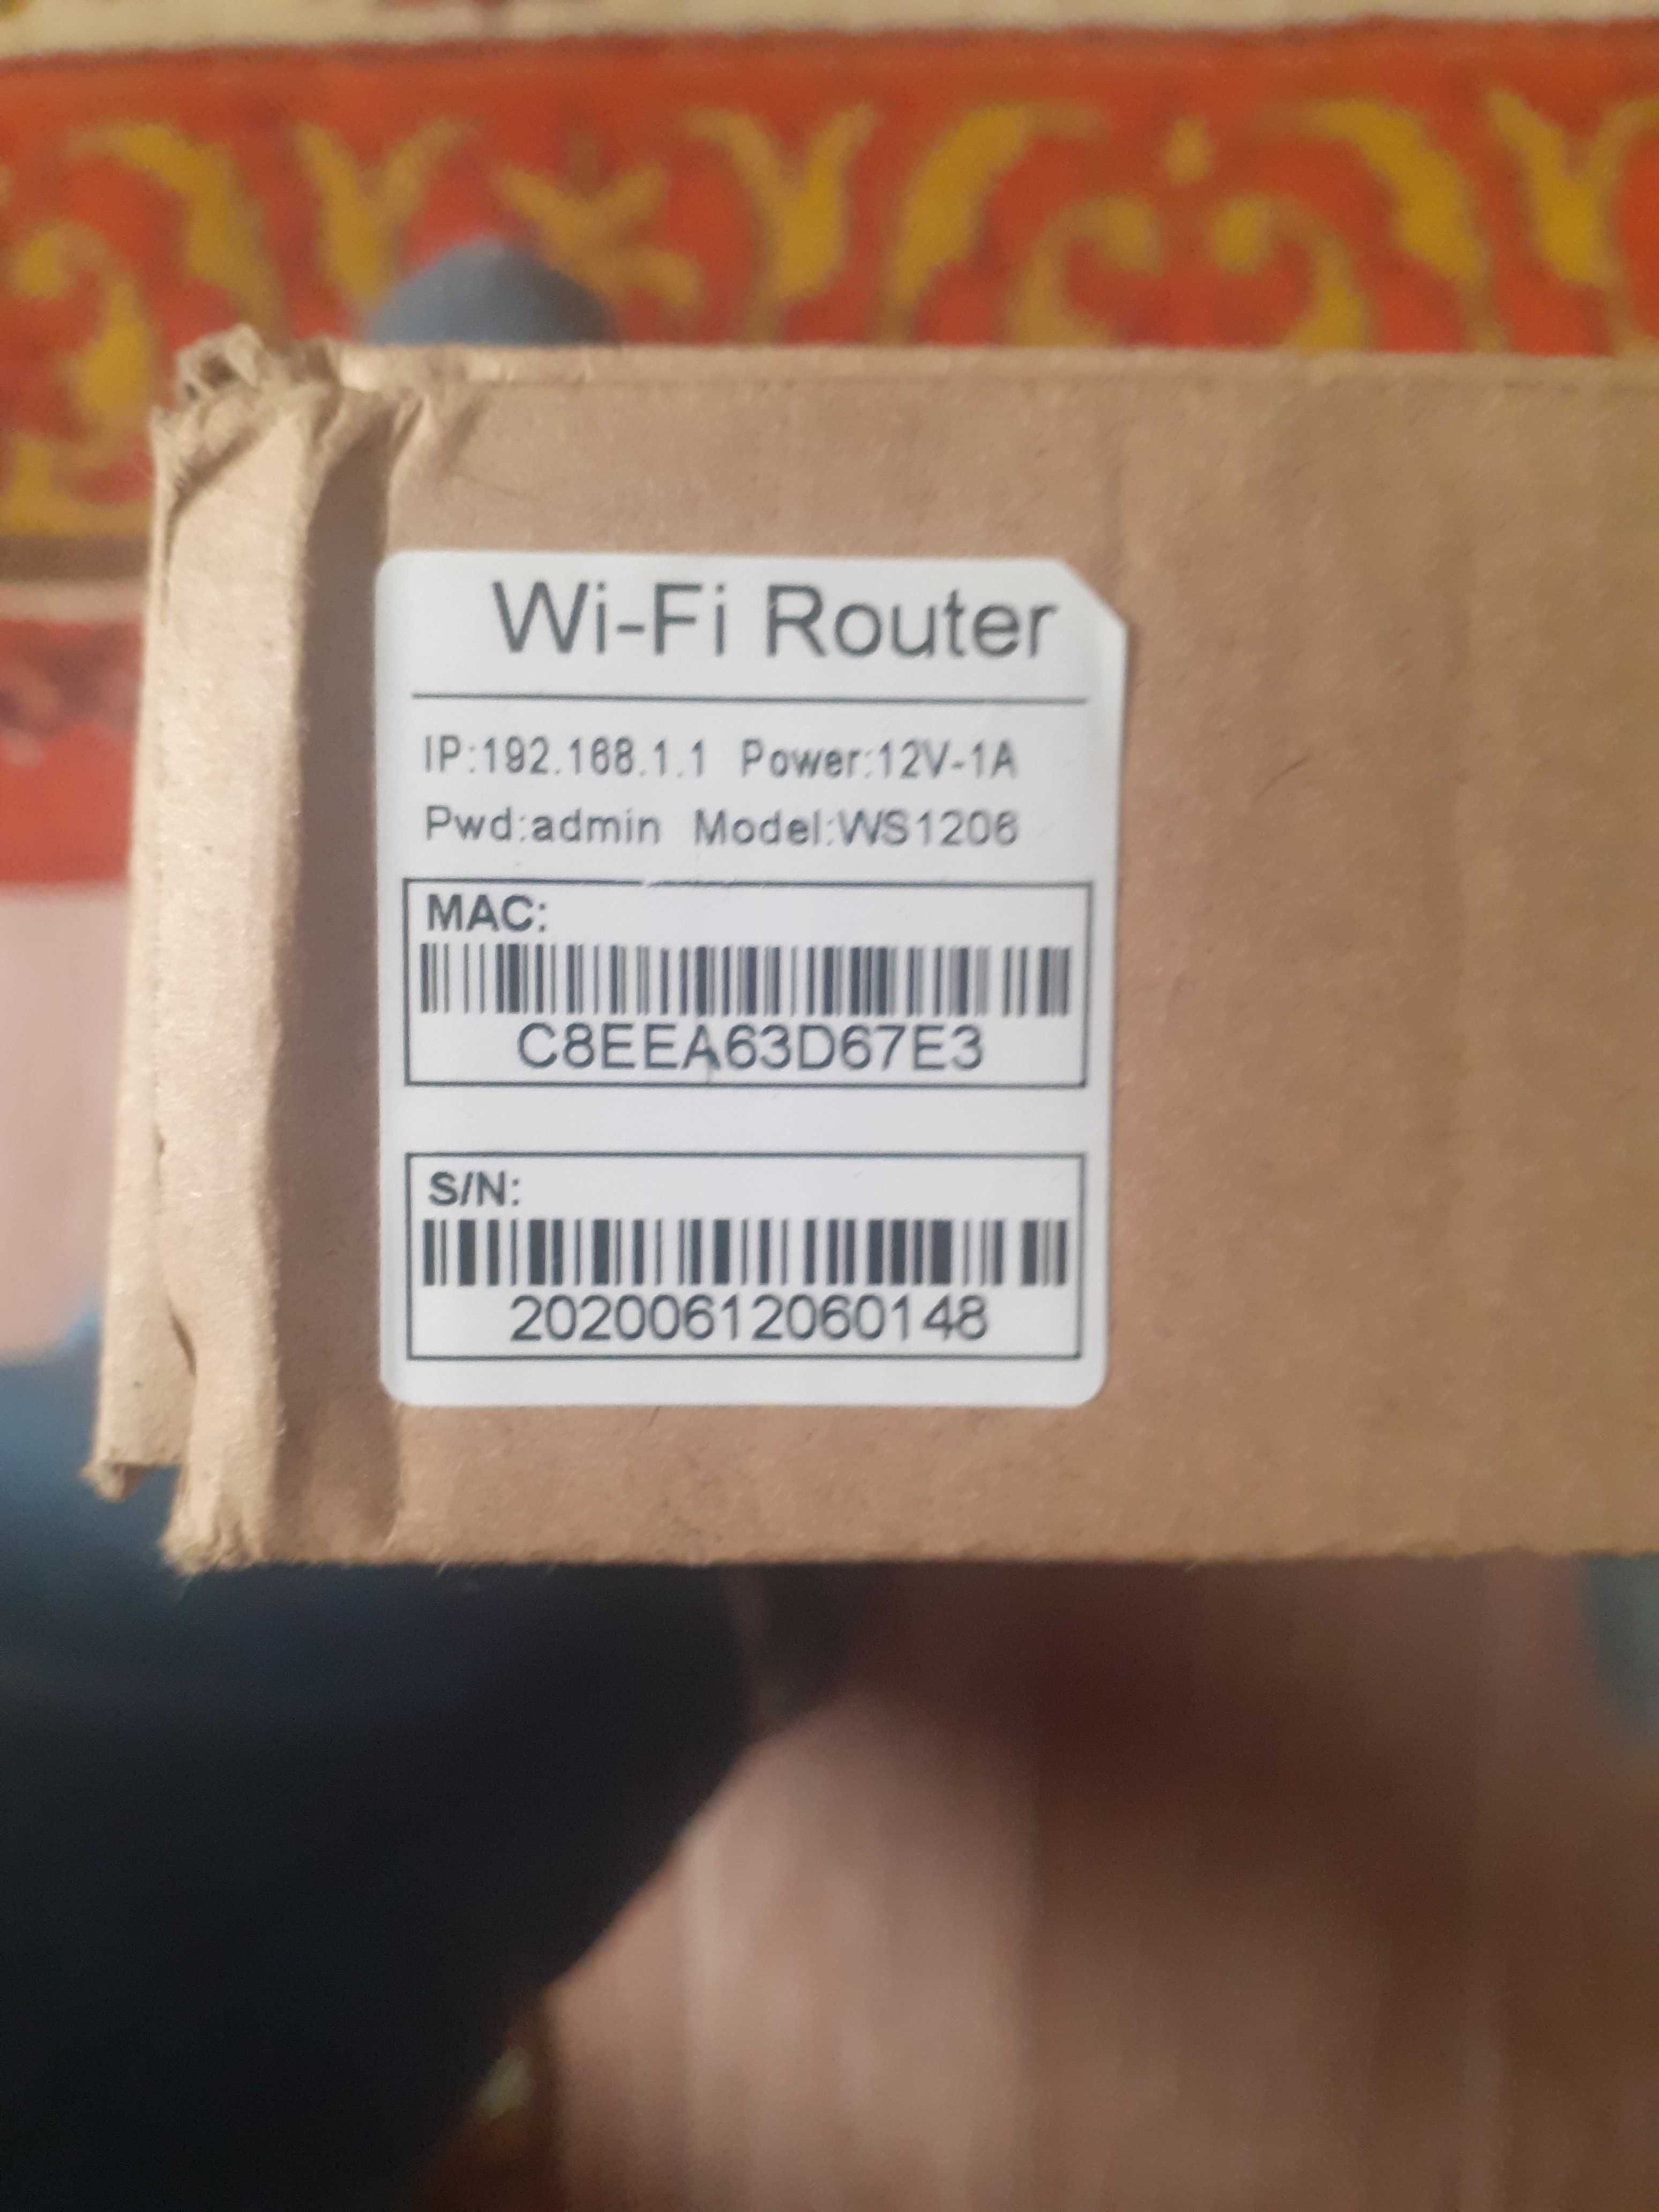 Wi-Fi Router . Model WS 1206